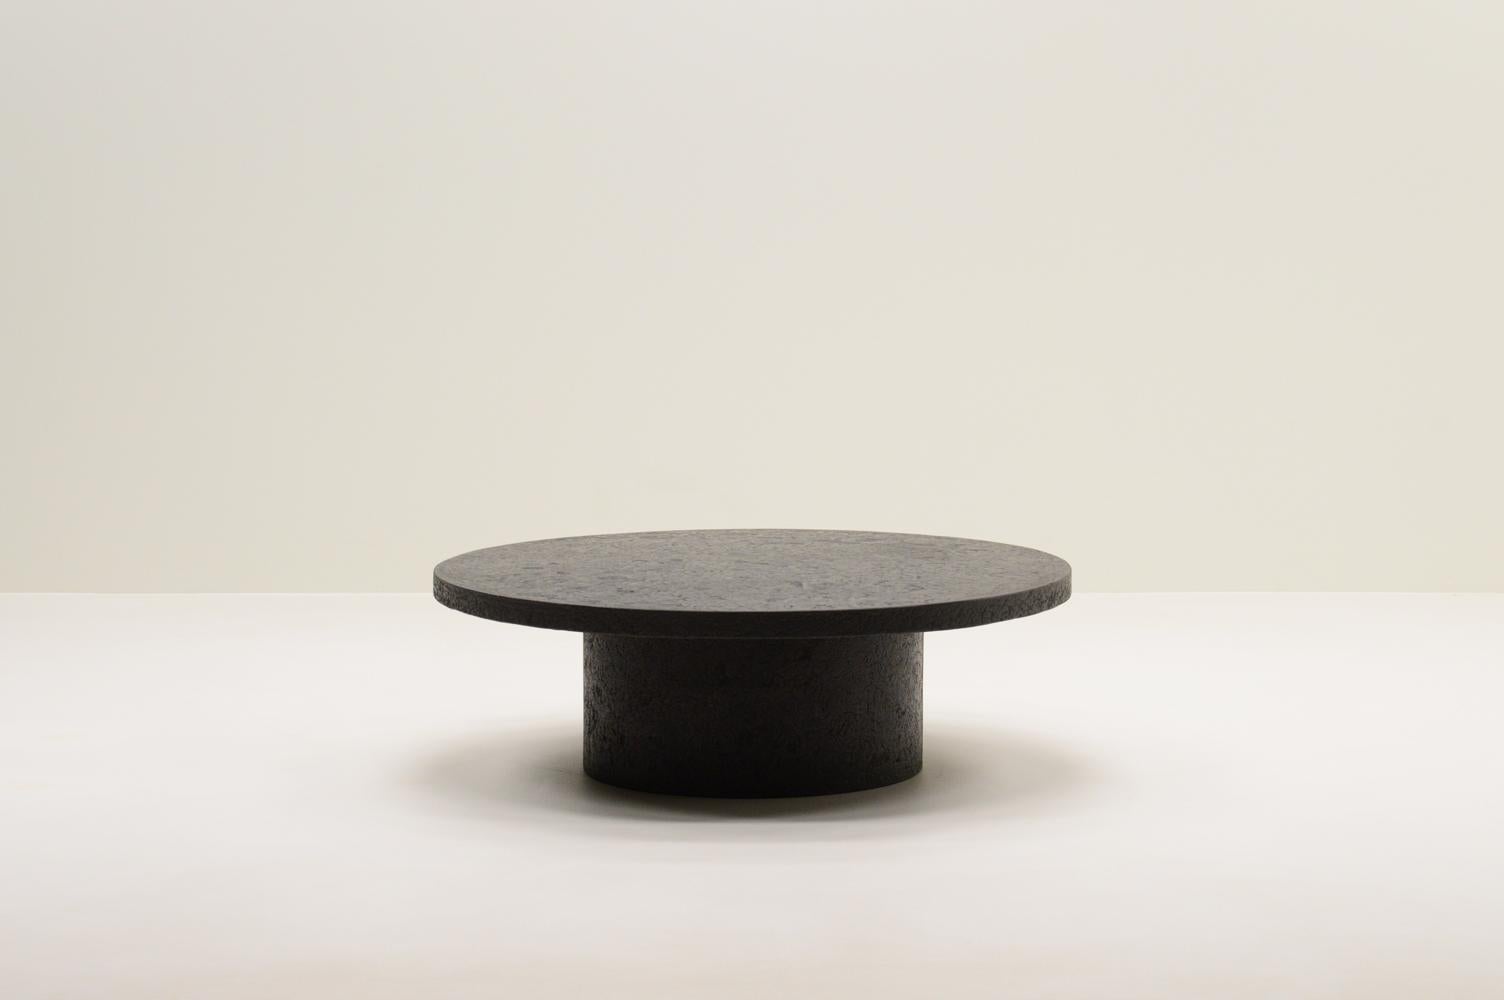 Black brutalist stone resin coffee table, 70’s The Netherlands. Impressive table made from a mixture of stone and resin, but looks completely stone. This gives a beautiful pattern and makes the table lighter. The base and top are in one piece. In